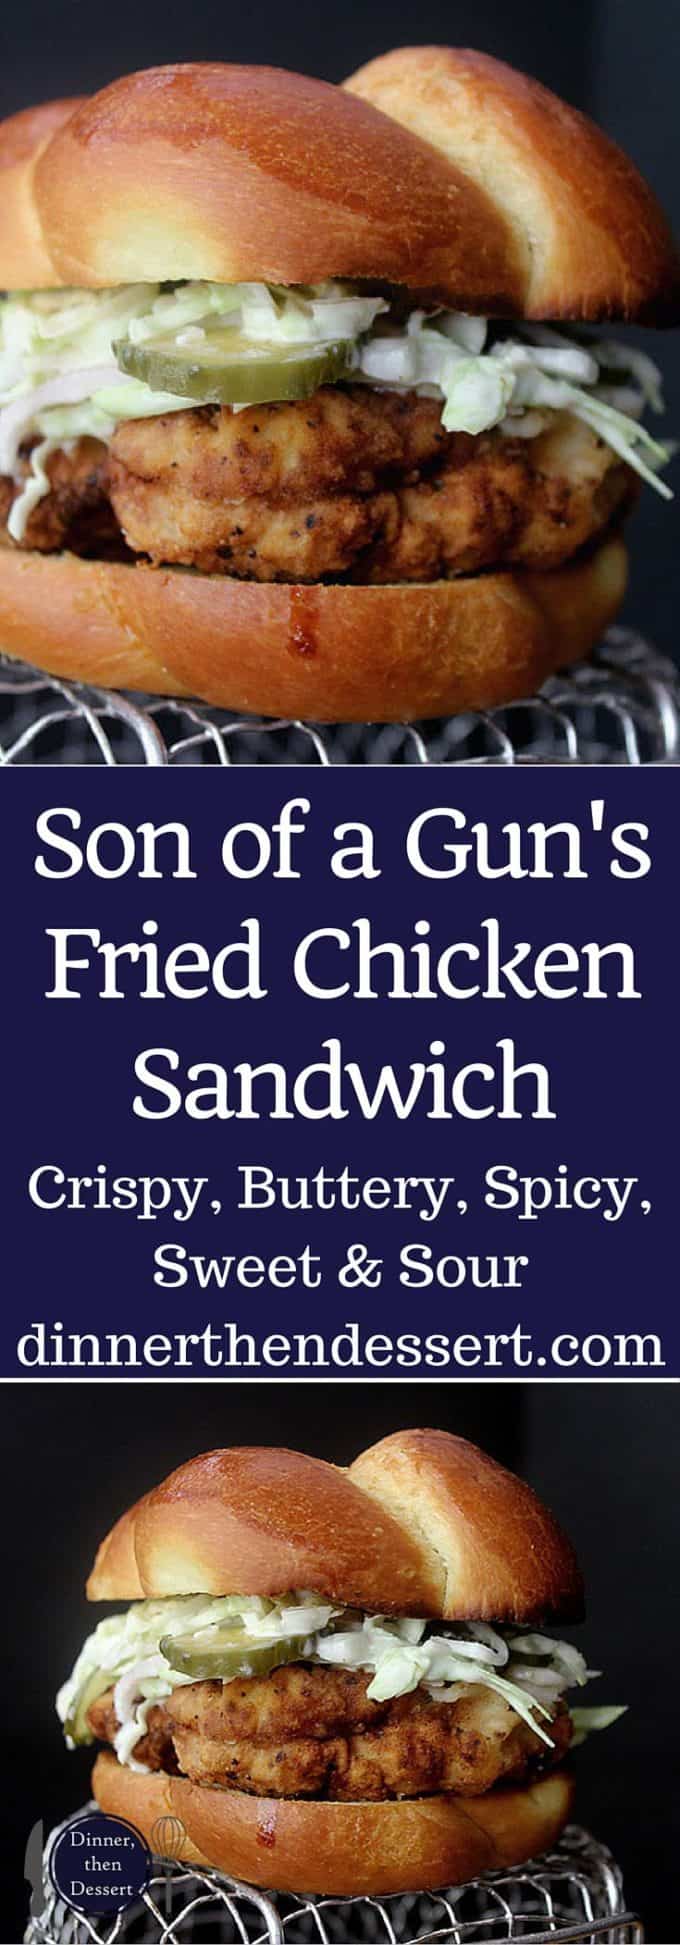 The Son of A Gun Fried Chicken Sandwich is crispy, juicy, spicy, sweet and sour in a buttery toasted bun without an impossible to get reservation.